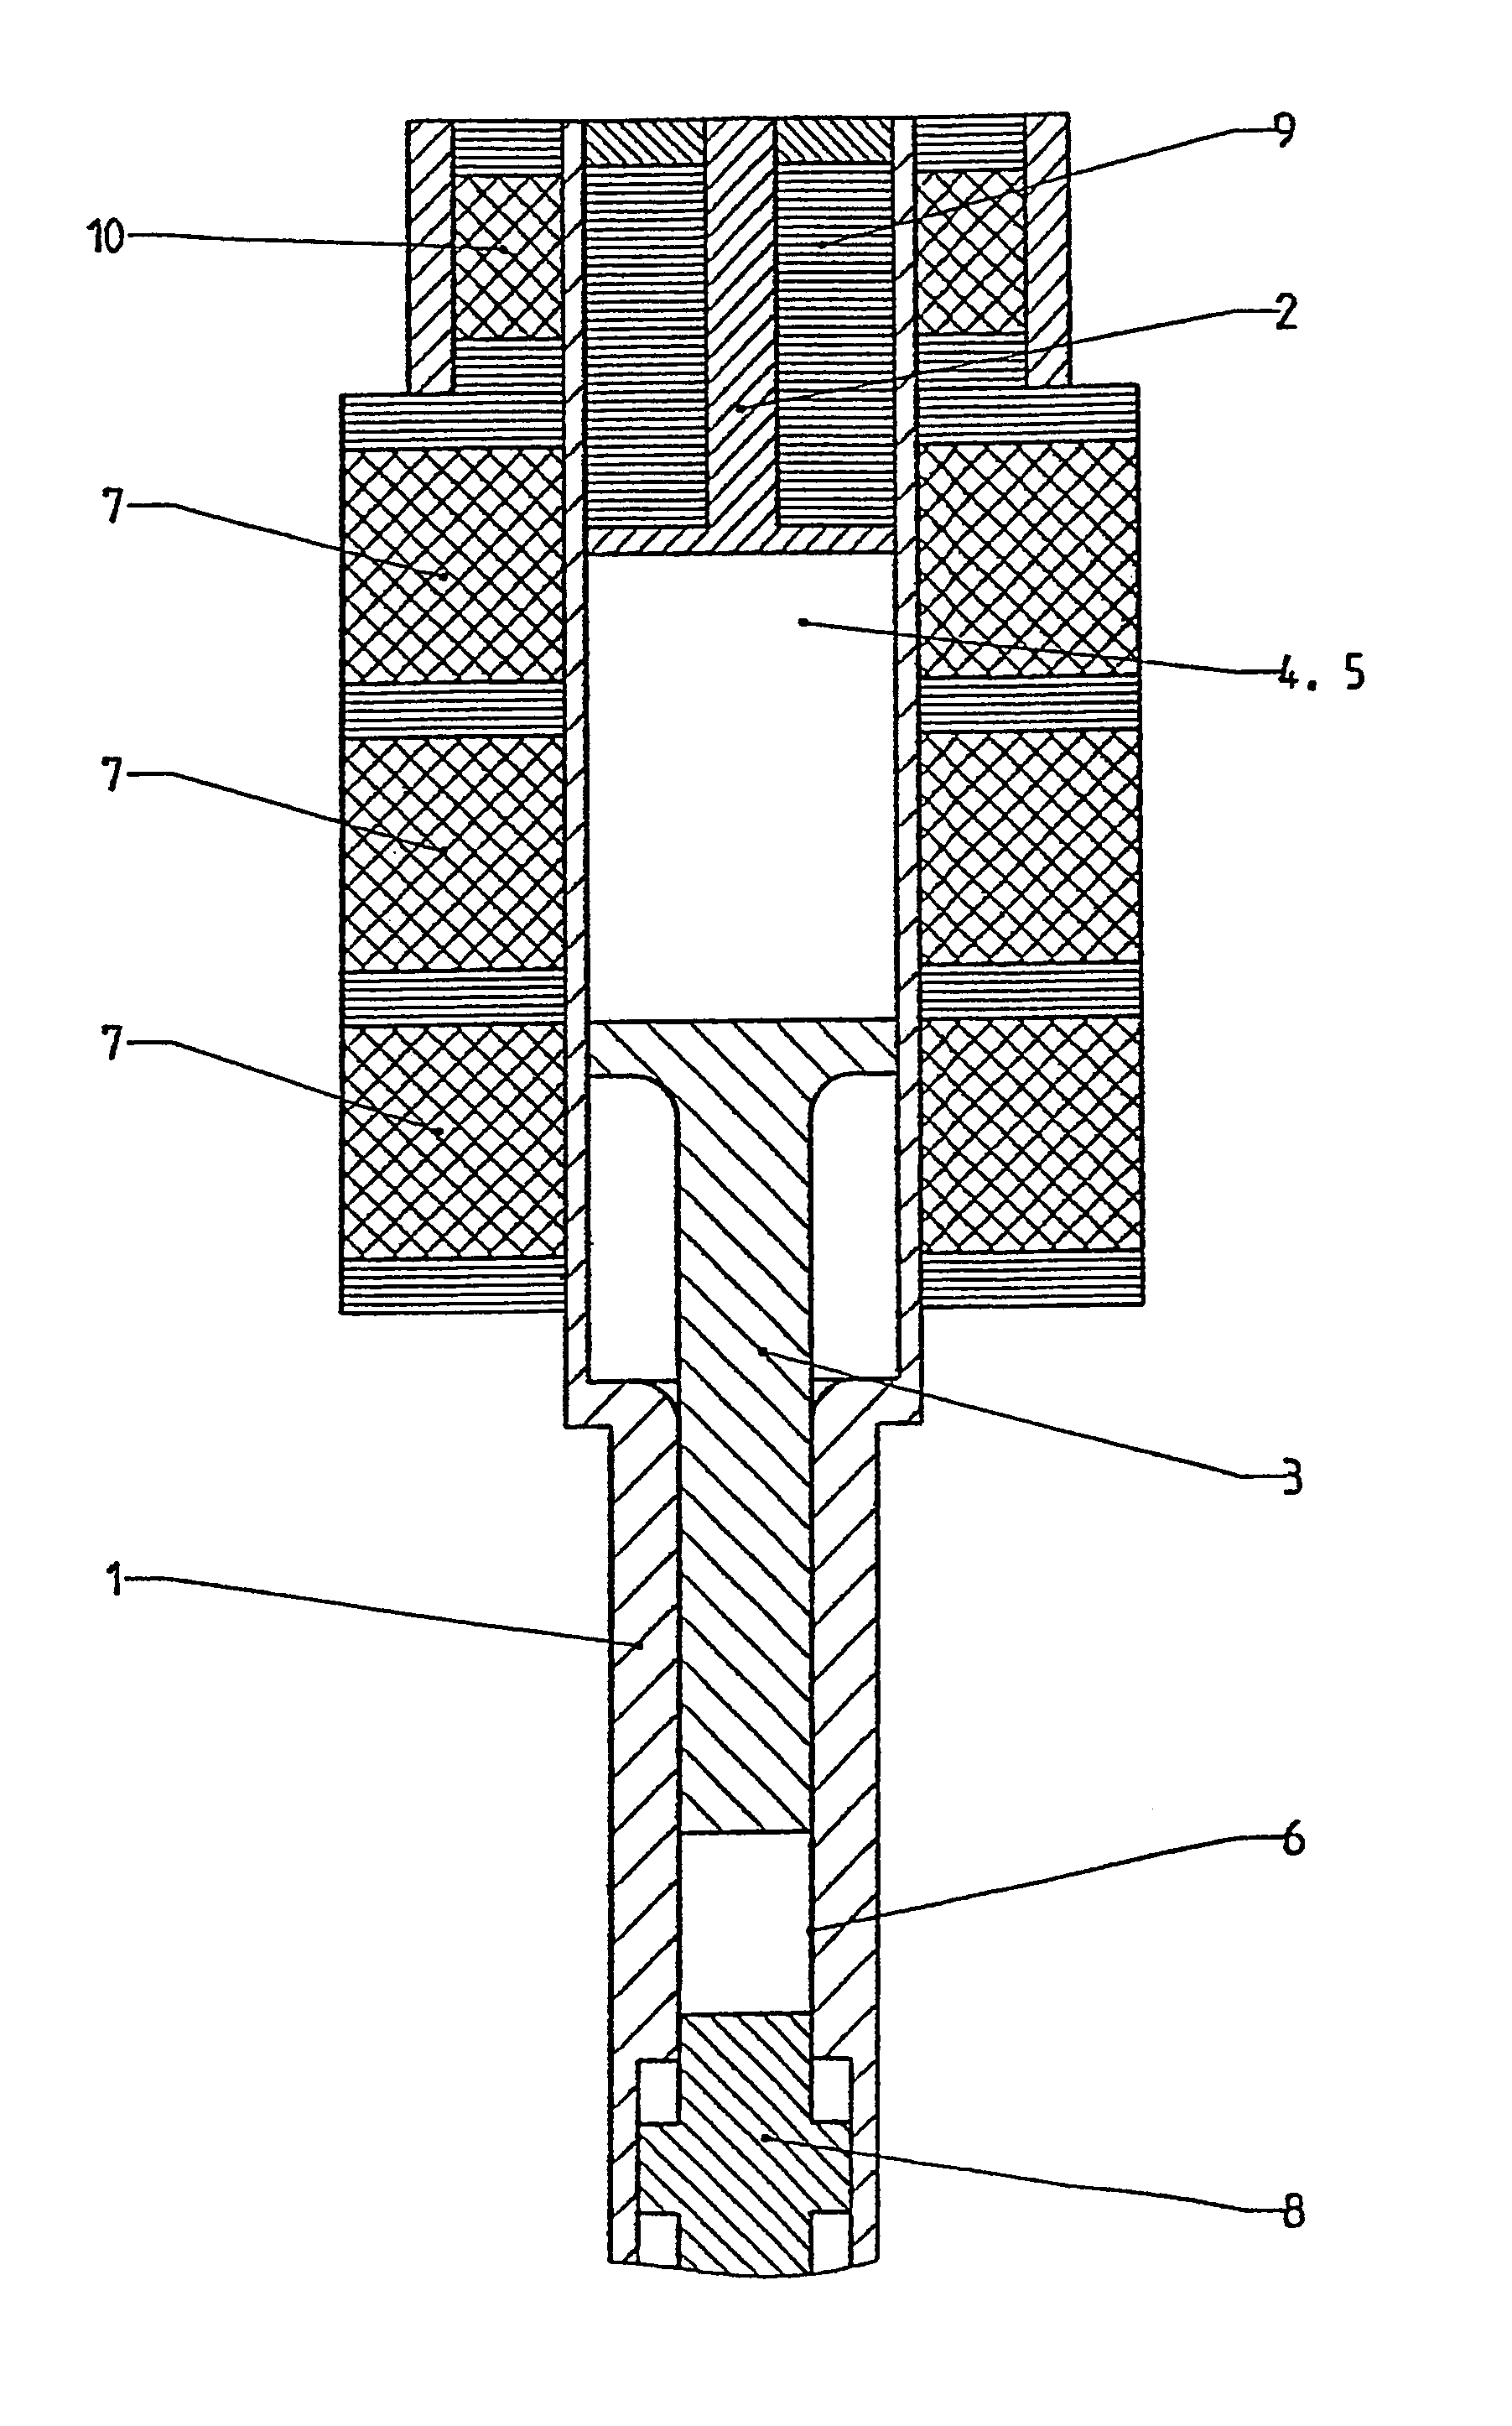 Pneumatic spring percussion mechanism with an electro-dynamically actuated driving piston